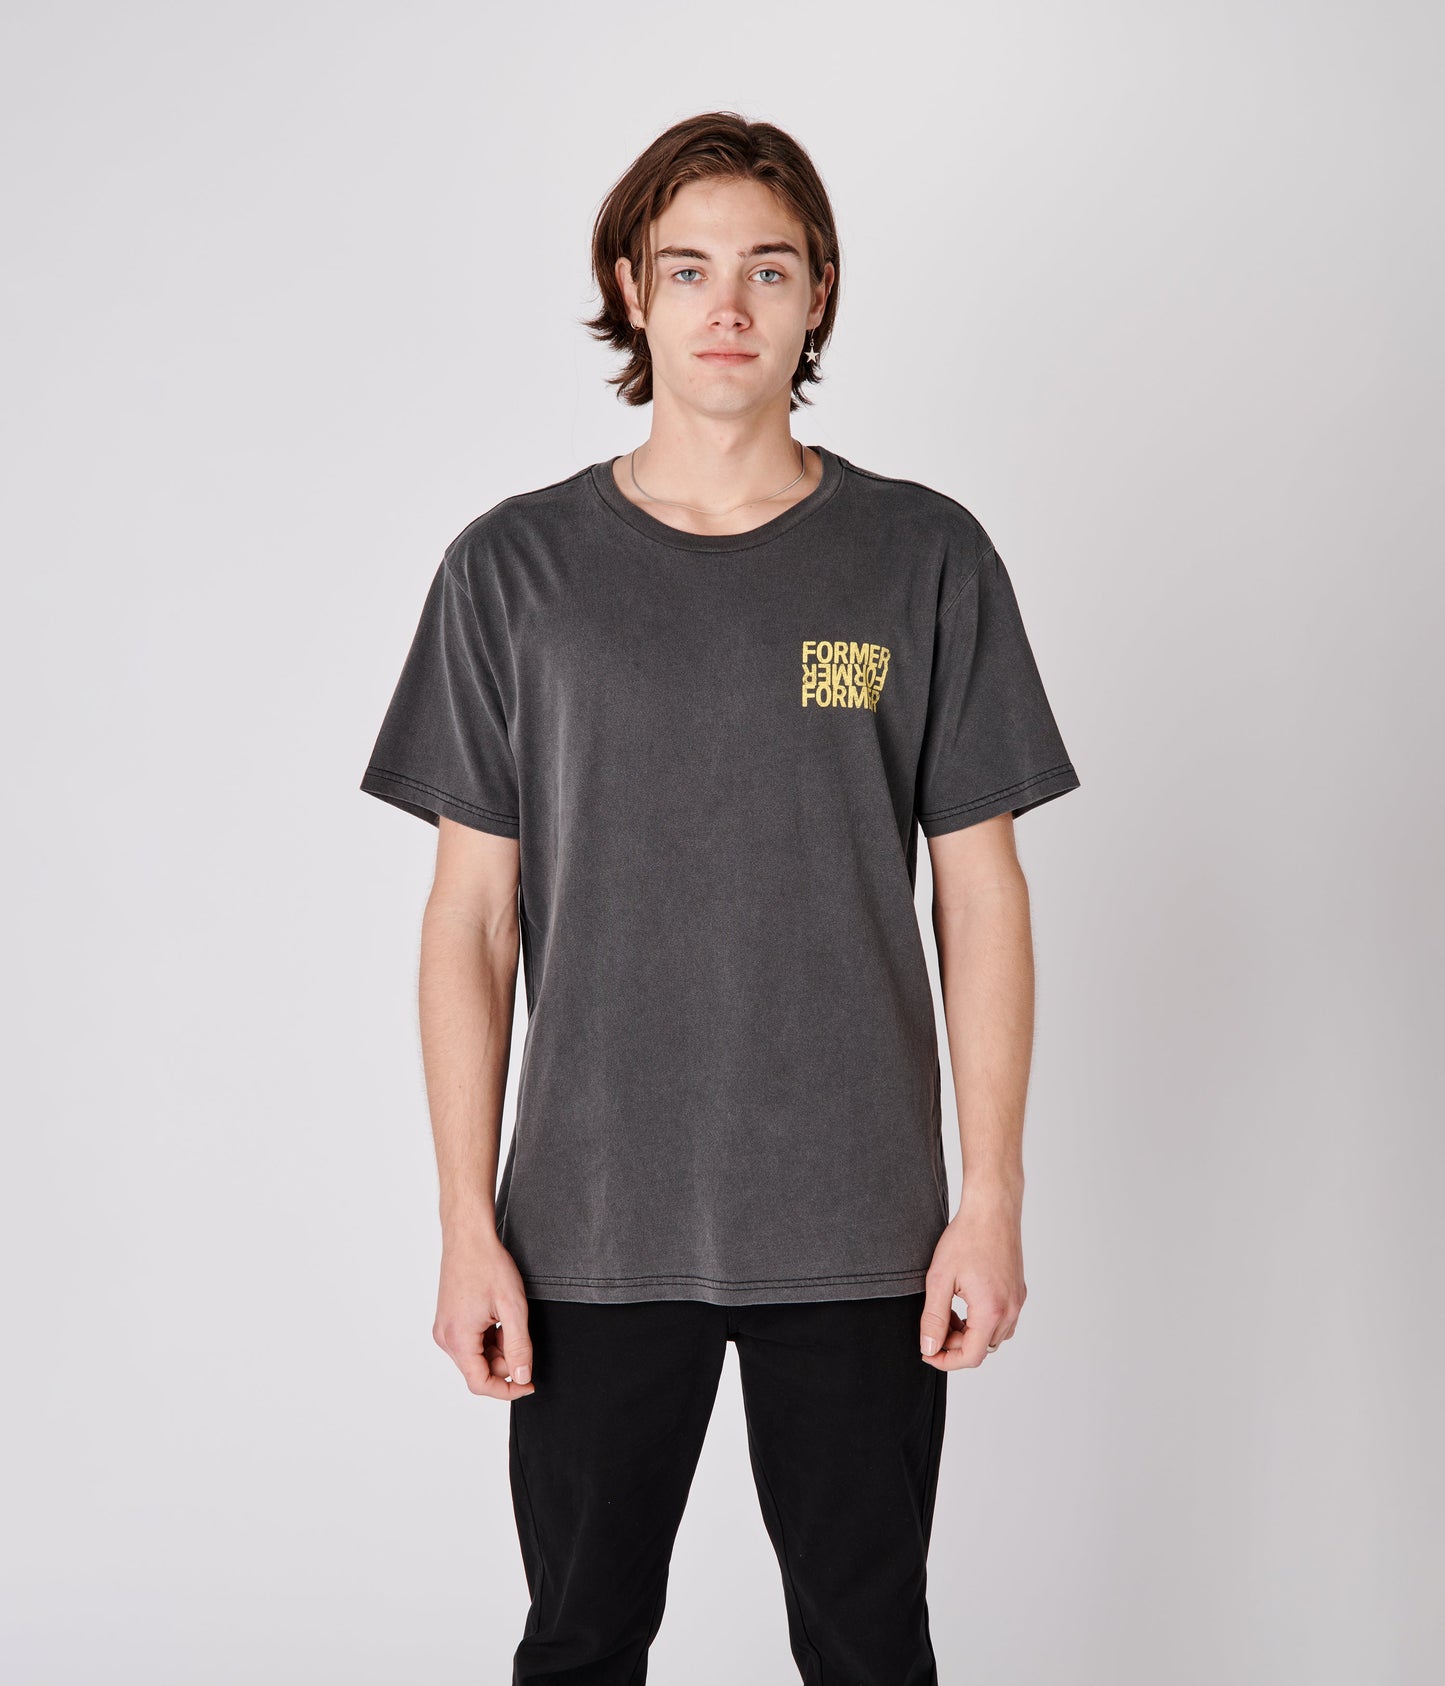 RELIEF T-SHIRT // WASHED BLACK